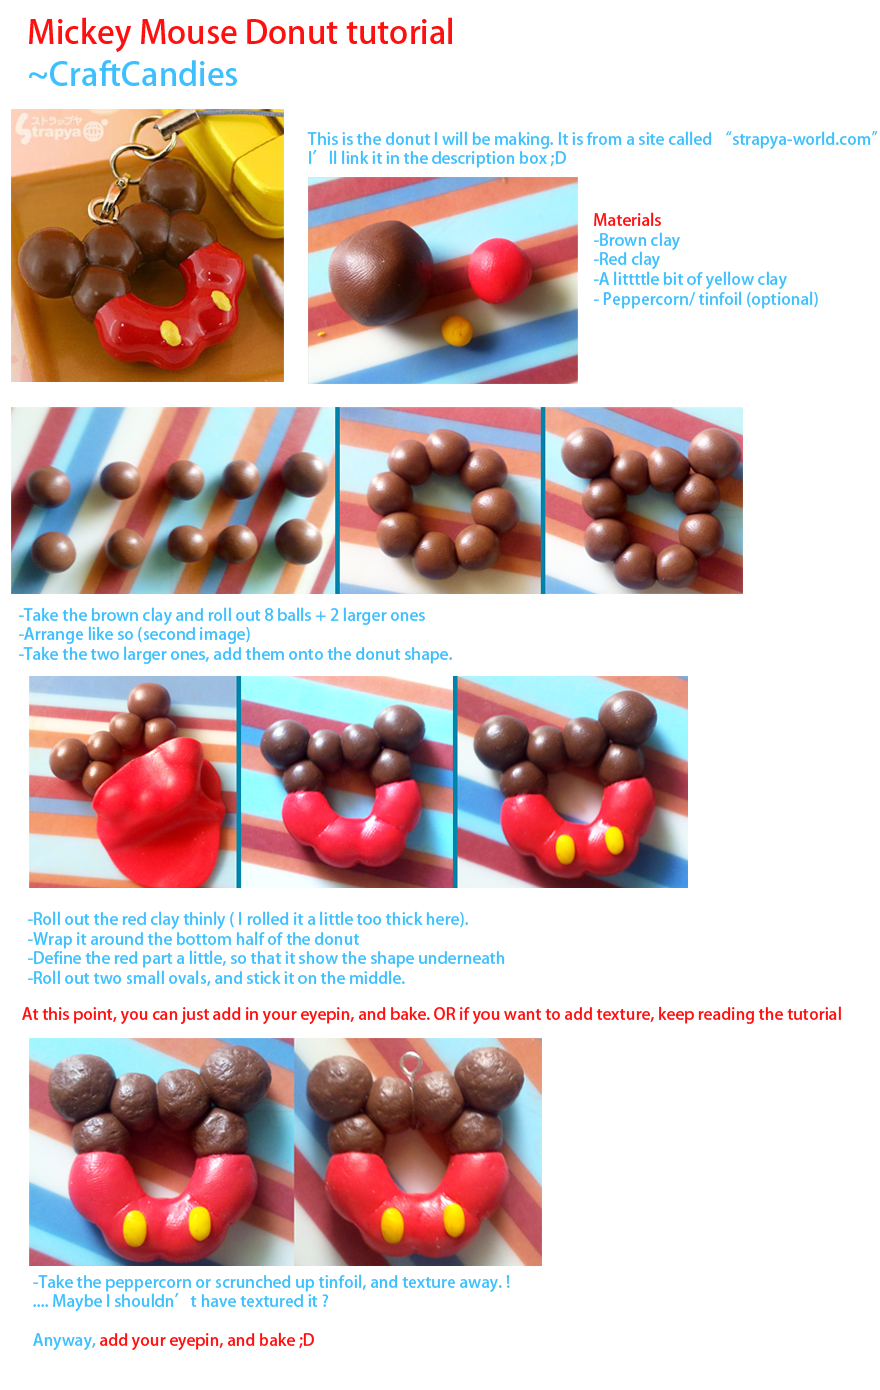 polymer_clay___mickey_mouse_donut_tutorial_by_craftcandies-d4sc2x0.png